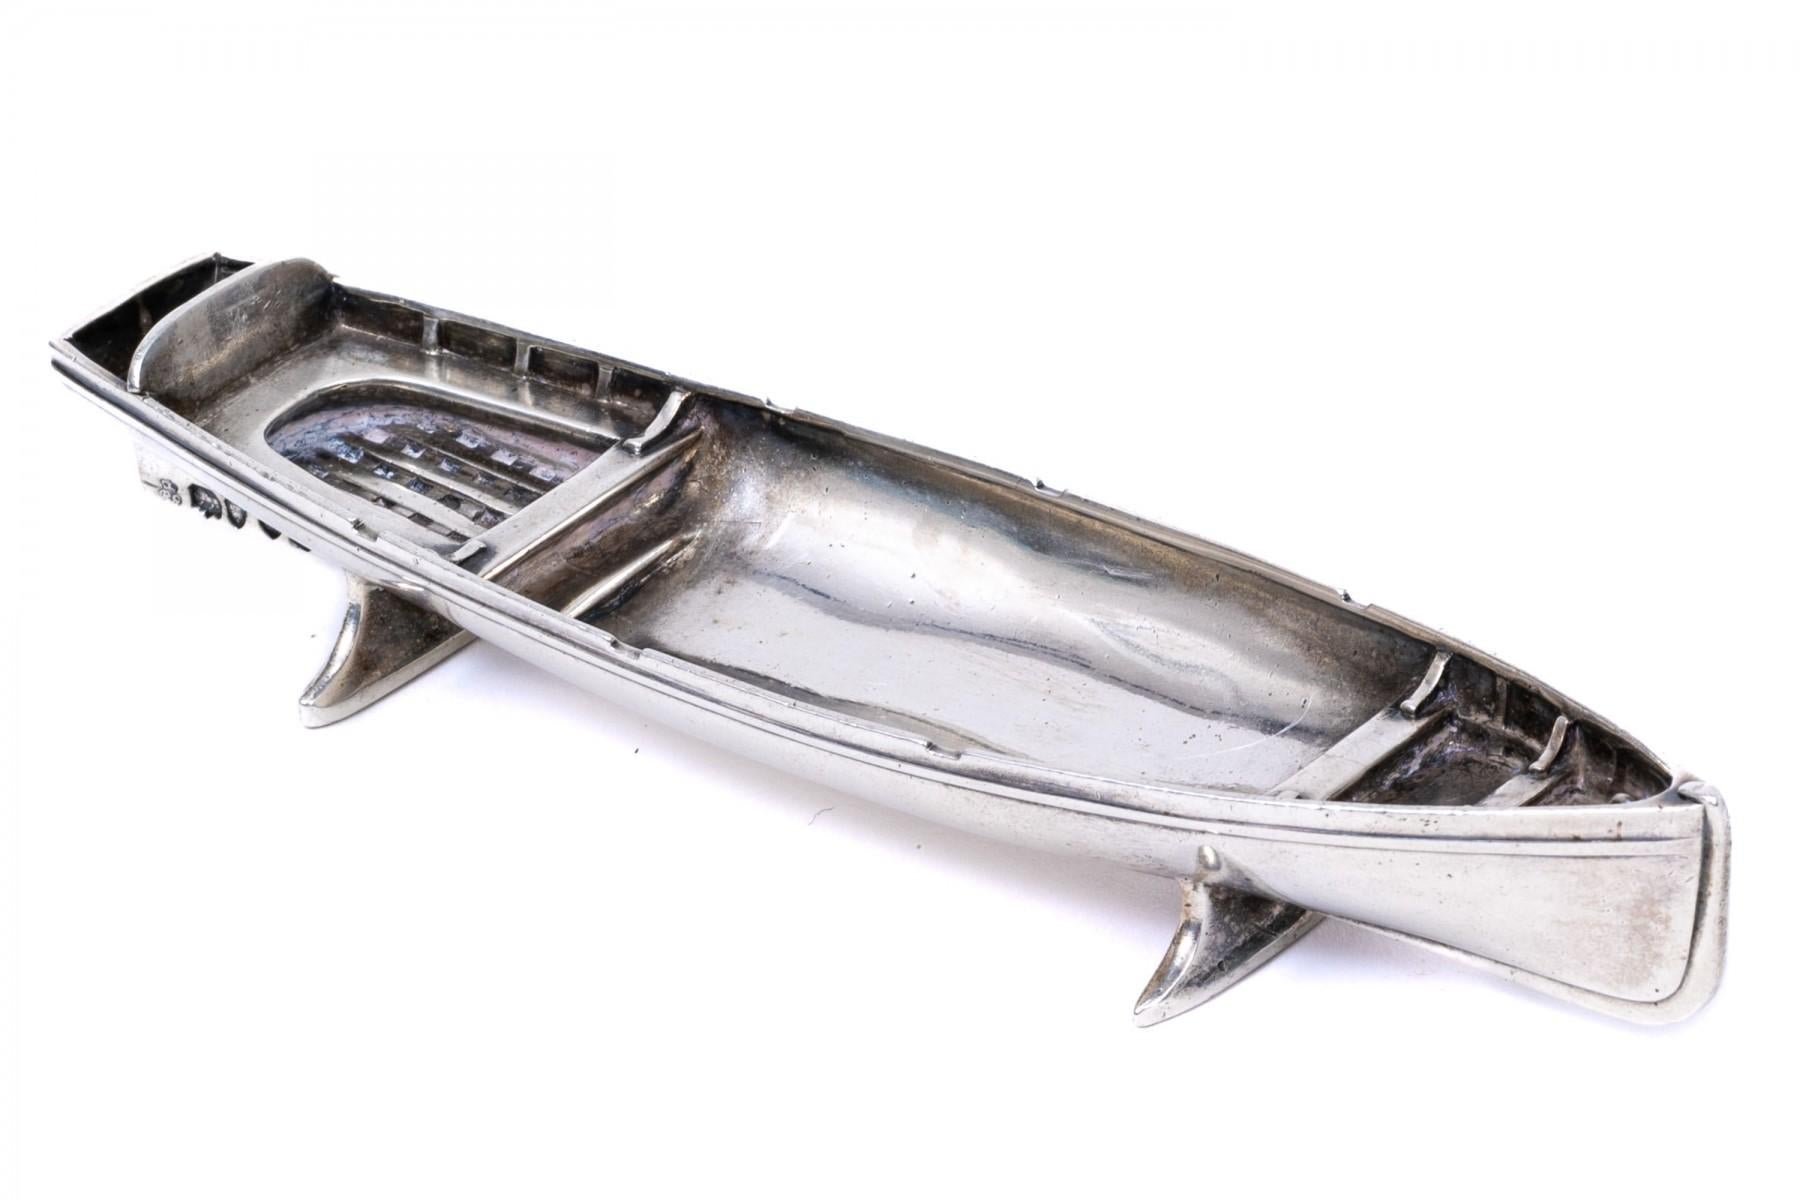 Antique sterling silver boat by Robert Garard II circa 1878. This magnificent diminutive lifeboat was made in London, England, by Robert Garard II, beautifully detailed and engraved 